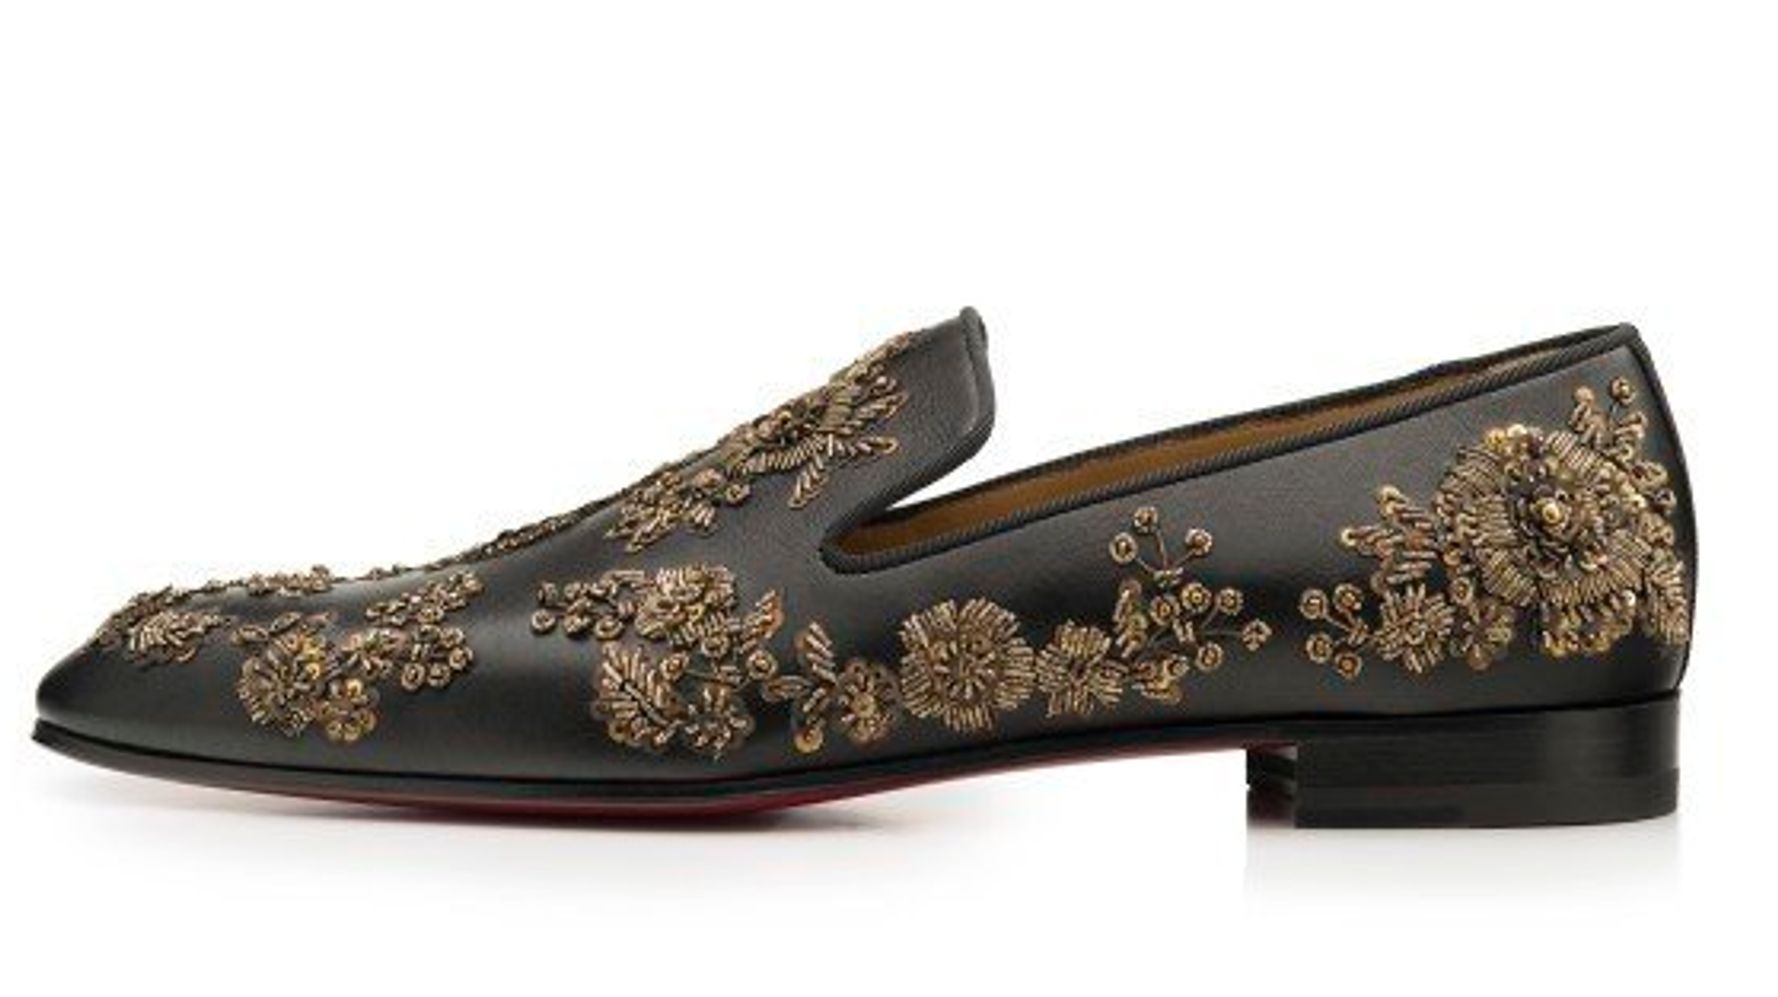 Sabyasachi Mukherjee collaborates with Christian Louboutin for shoe  collection